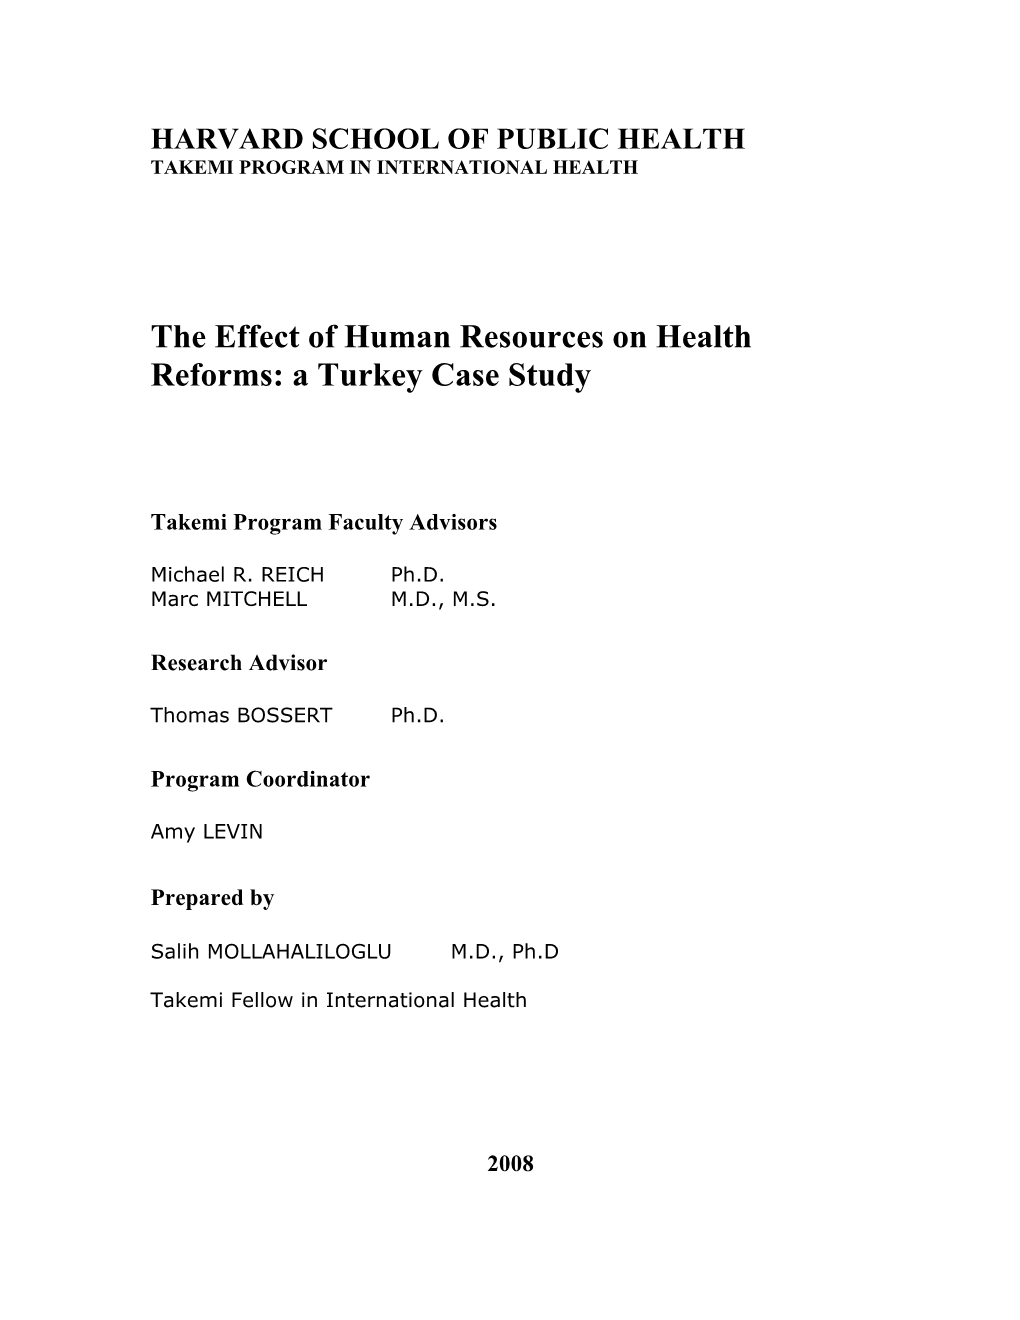 The Effect of Human Resources on Health Reforms: a Turkey Case Study